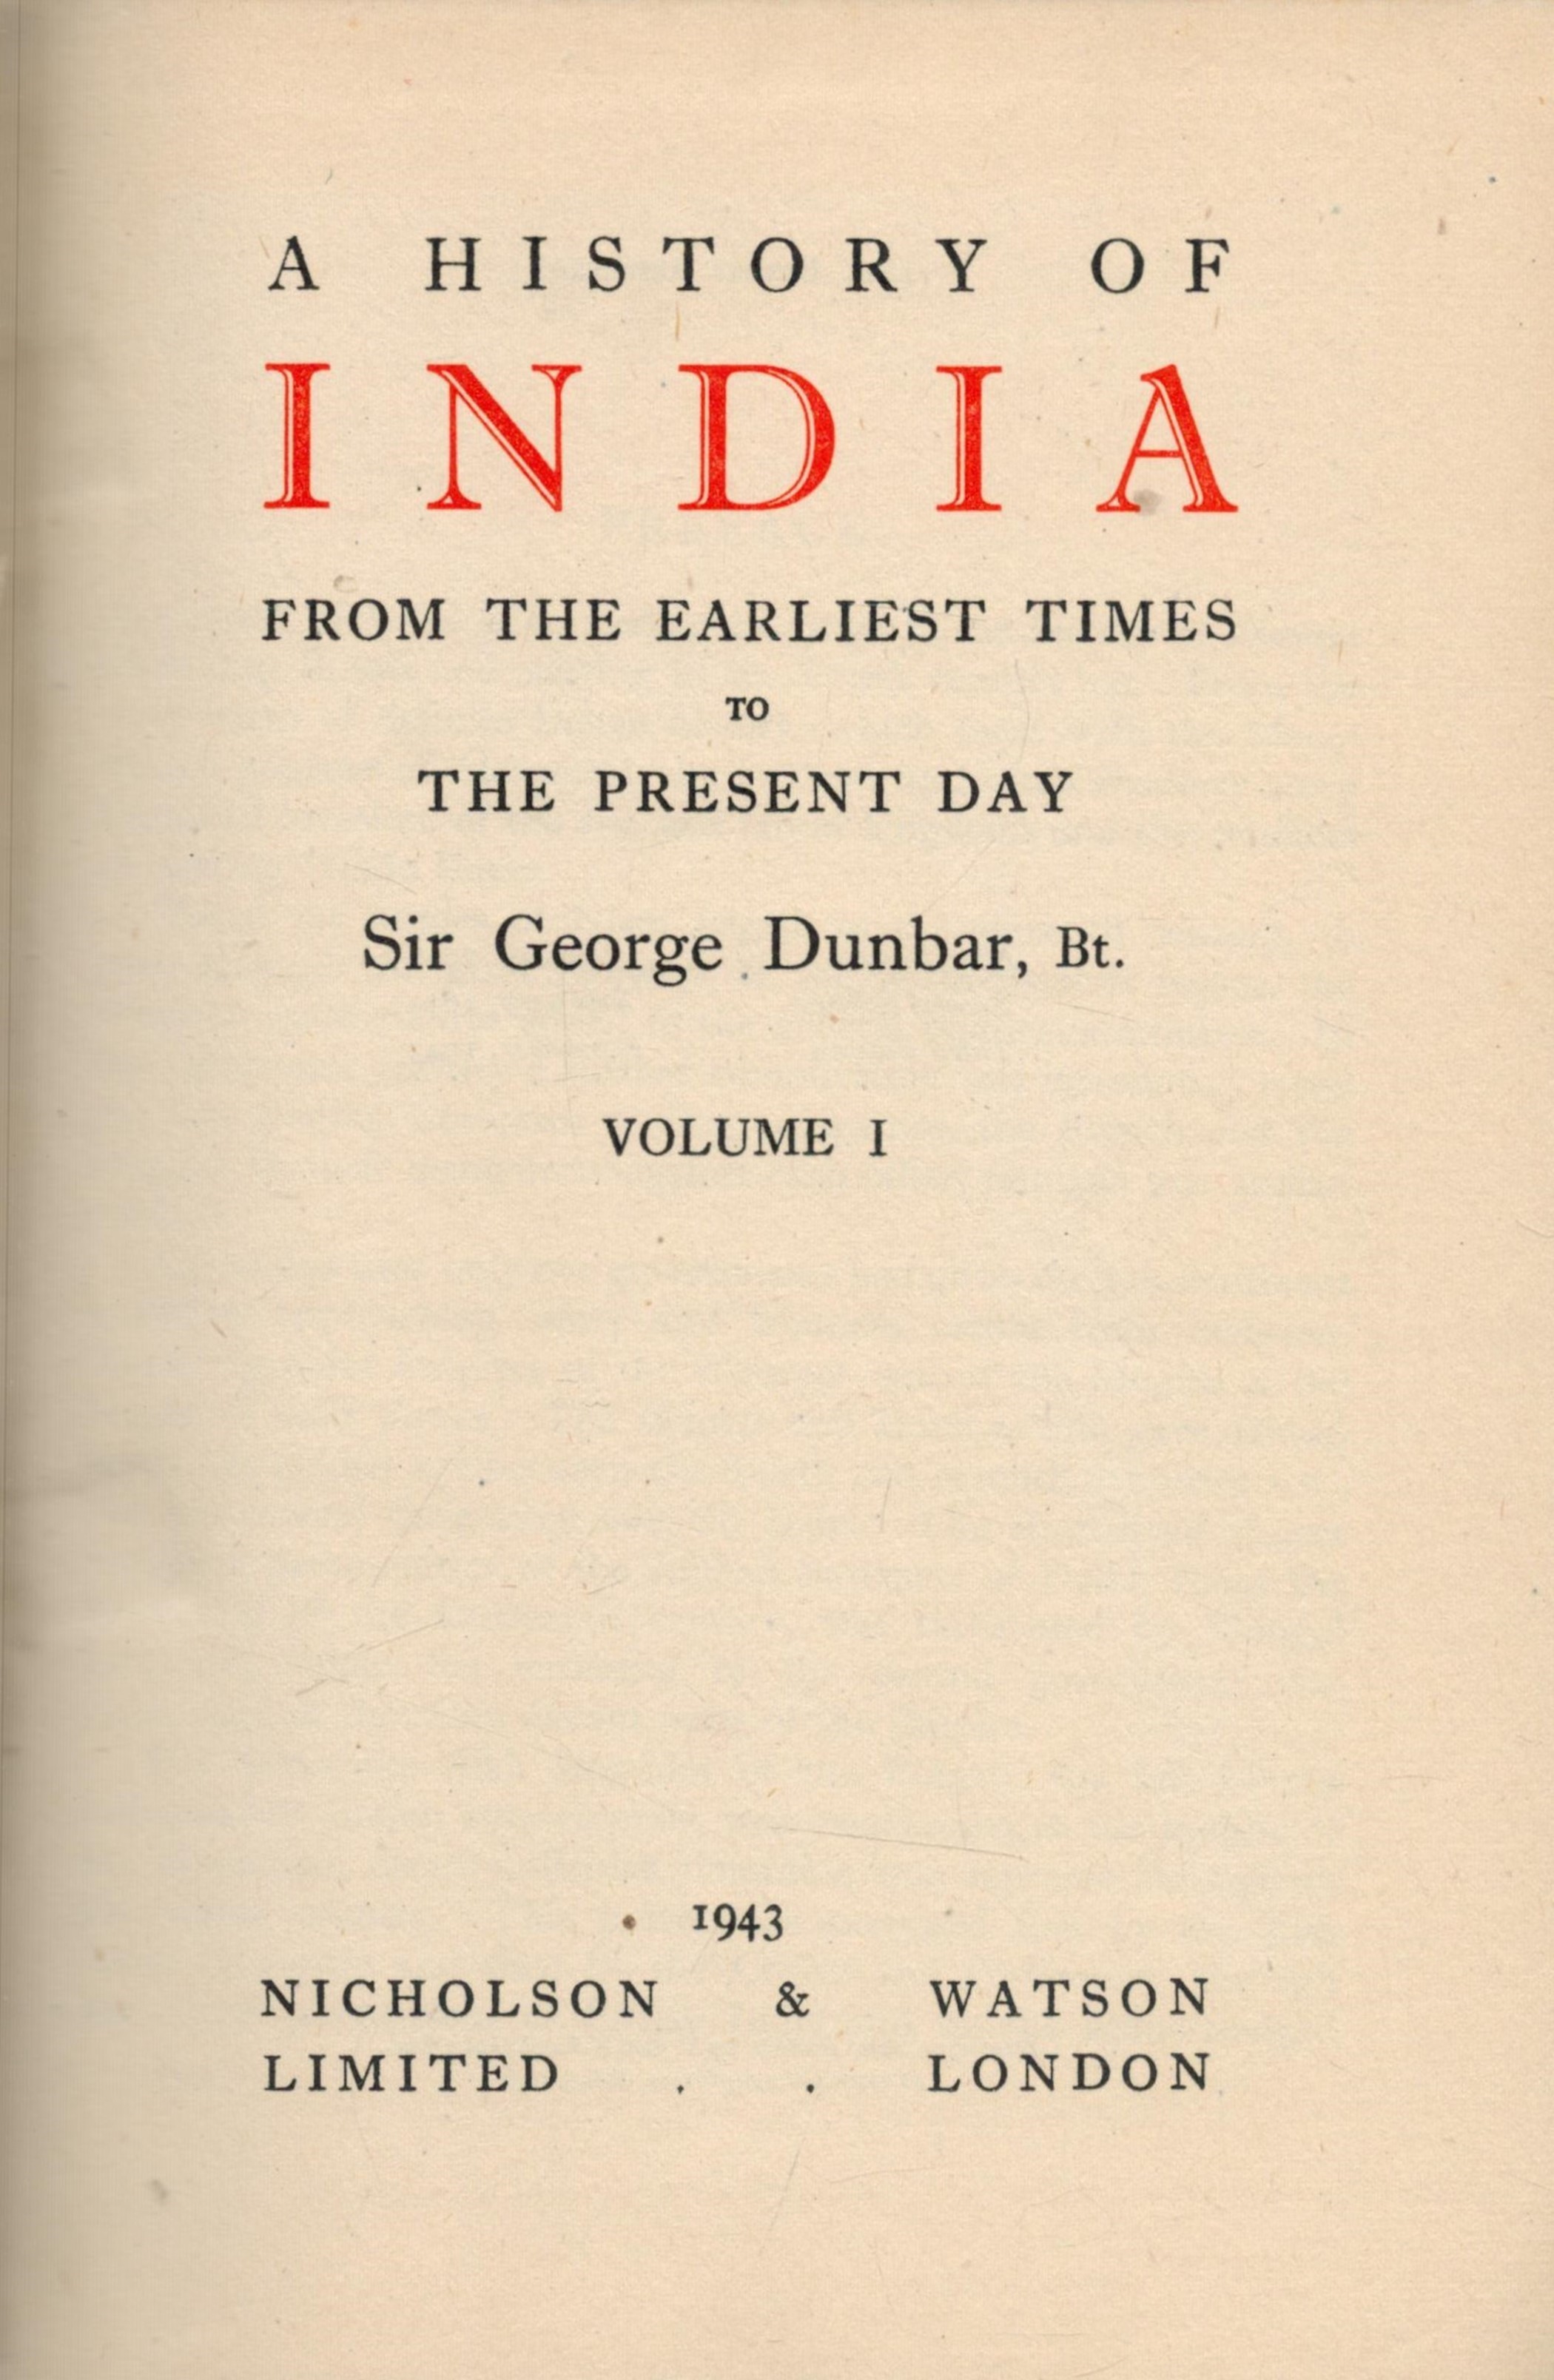 A History of India from the Earliest Times to the Present Day vol I Sir George Dunbar 1943 Third - Image 2 of 2